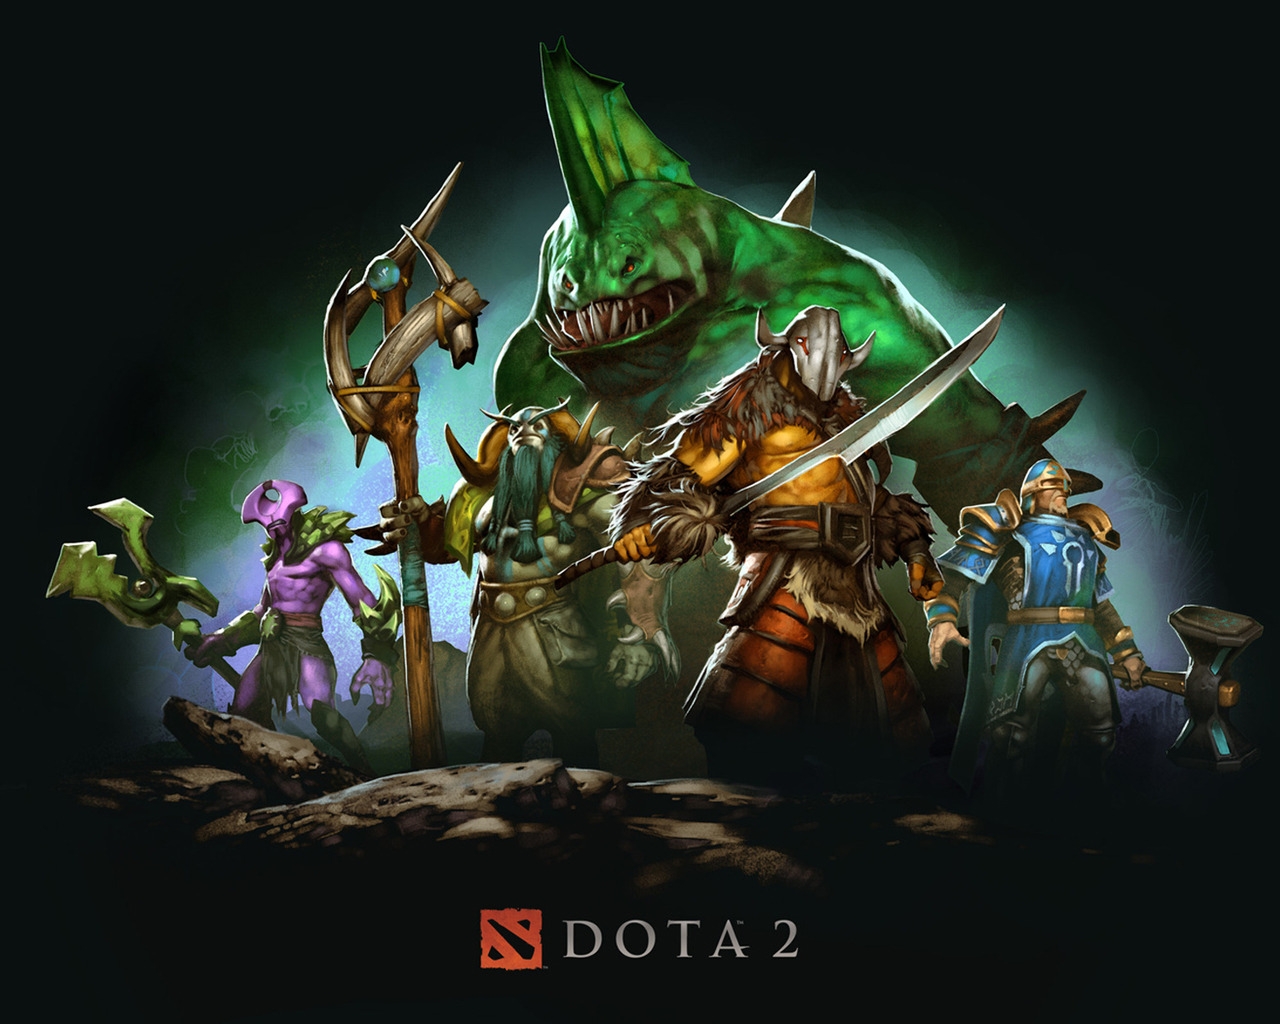 Dota 2 Characters for 1280 x 1024 resolution